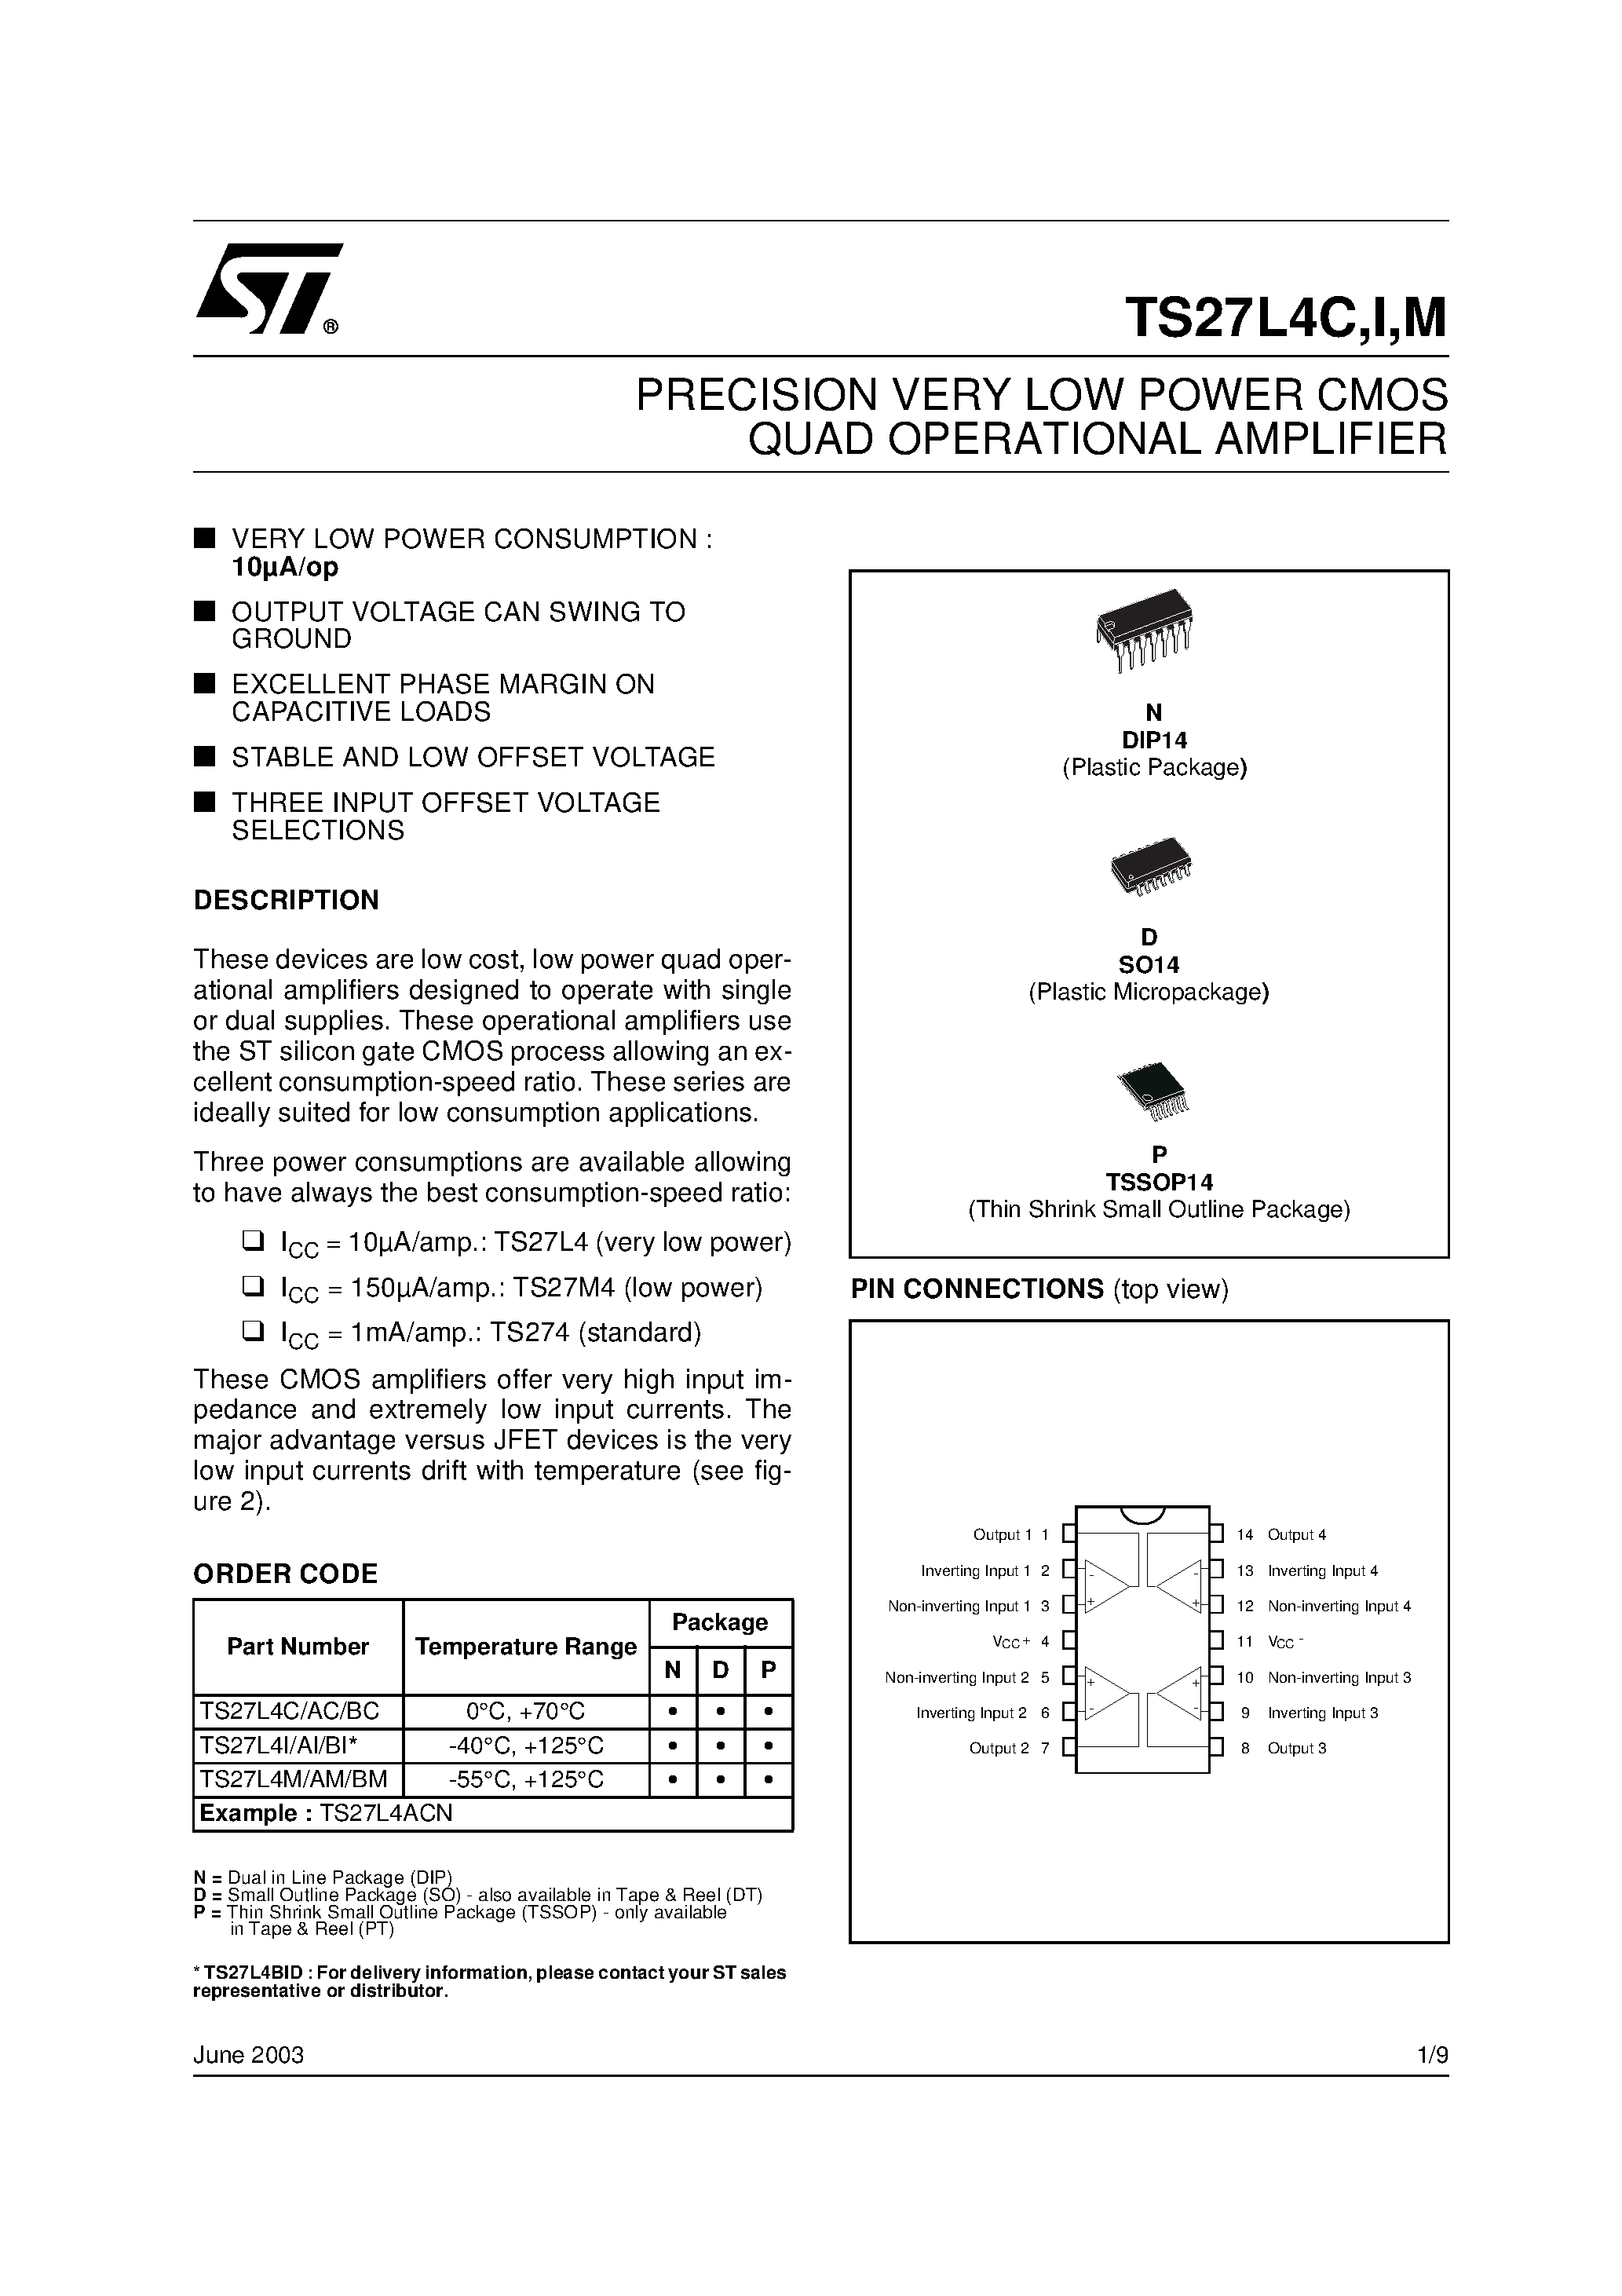 Datasheet TS27L4AI - PRECISION VERY LOW POWER CMOS QUAD OPERATIONAL AMPLIFIER page 1